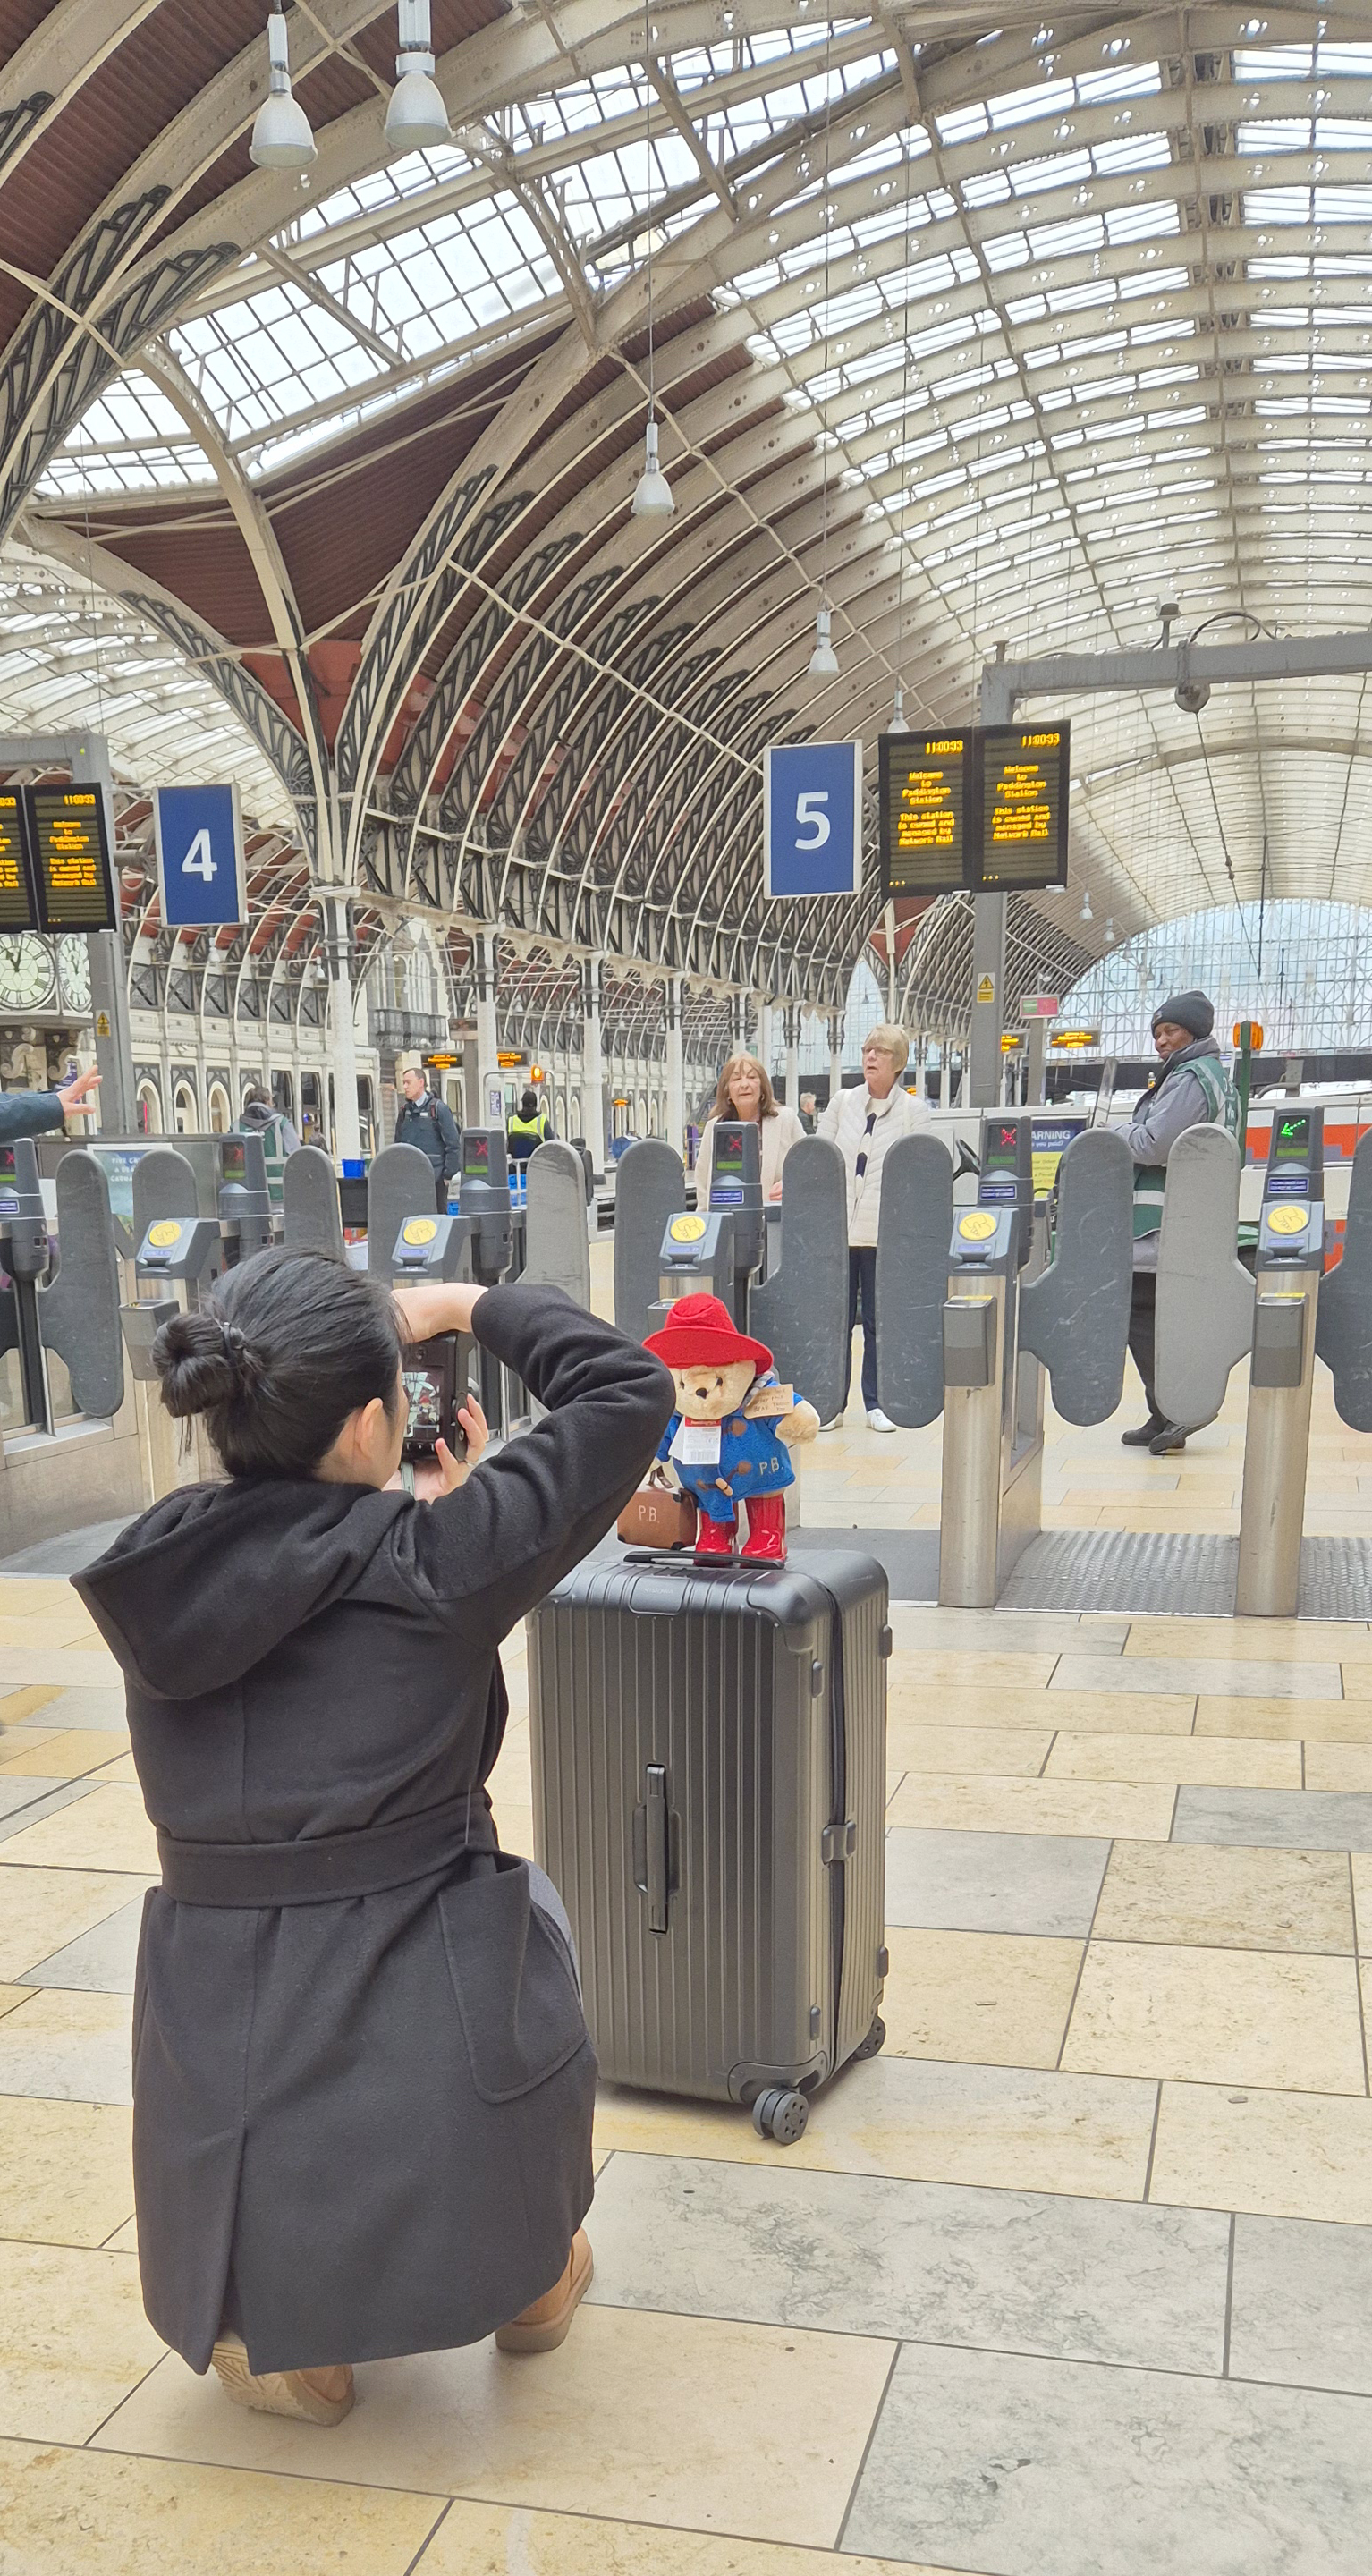 Woman photographing Paddington Station with bear in foreground